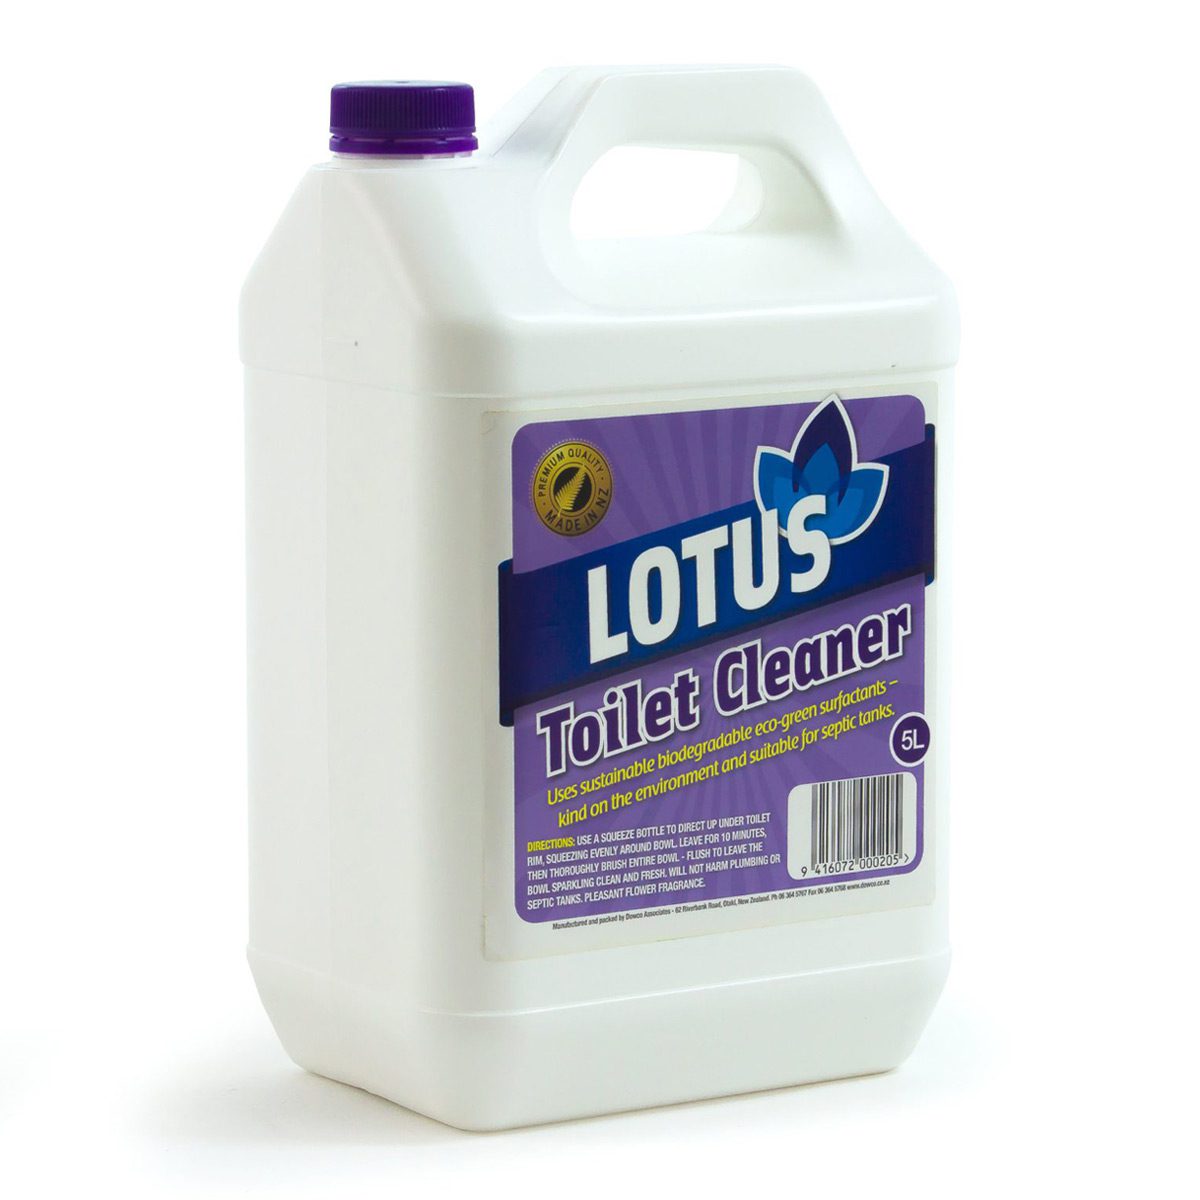 cleaning-products-washroom-lotus-toilet-bowl-cleaner-5L-litre-biodegradable-eco-green-surfactant-kind-environment-suitable-septic-tanks-pleasantly-scented-vjs-distributors-LTBC5